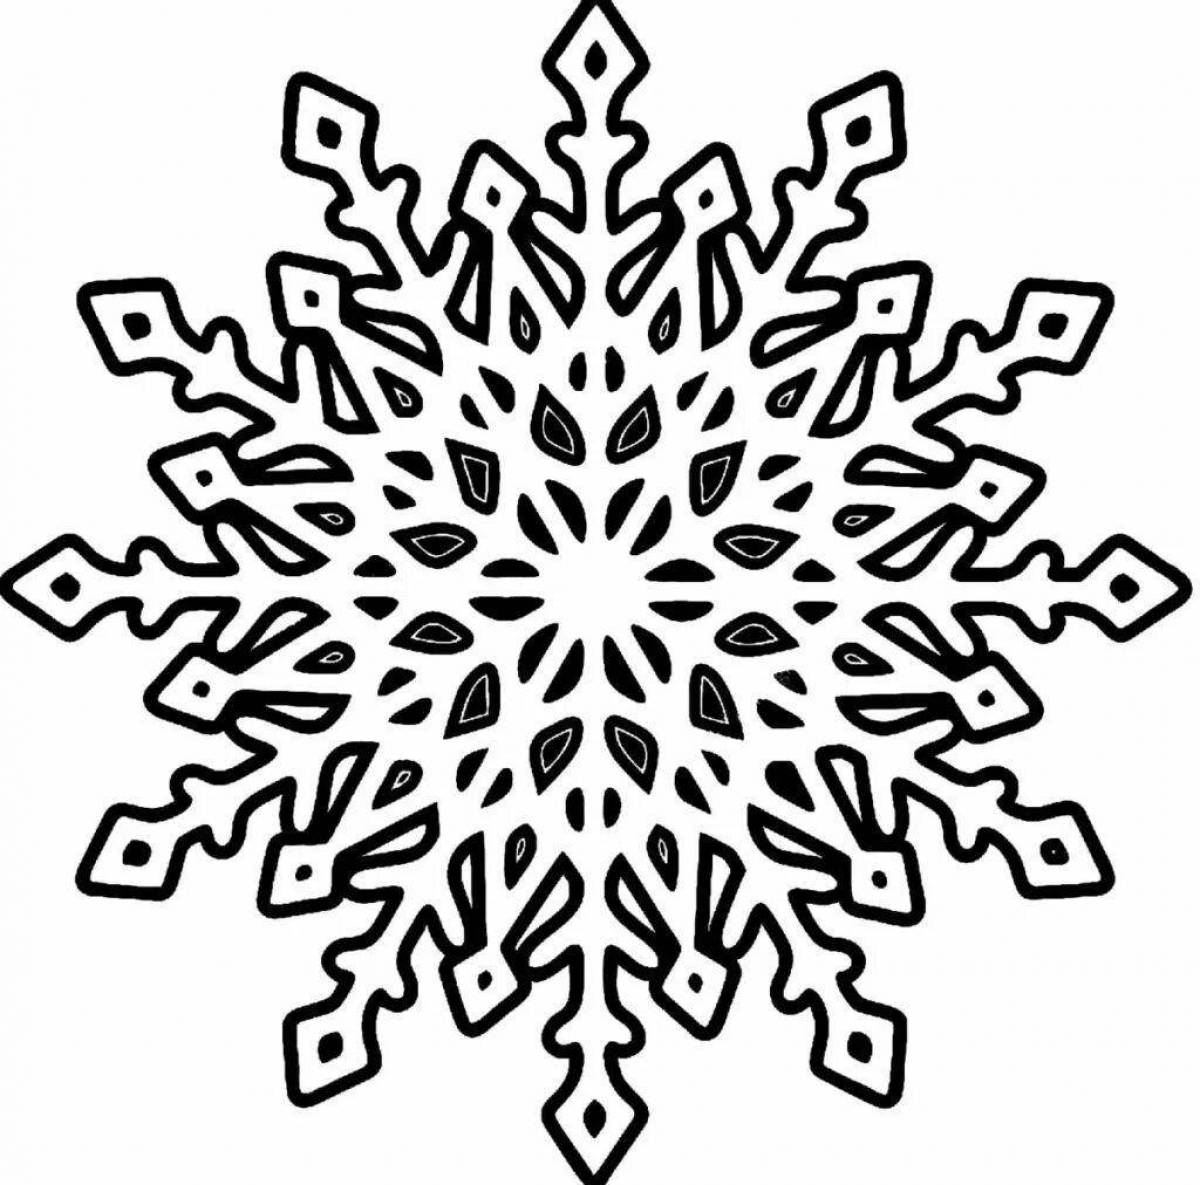 Adorable snowflake coloring book for 4-5 year olds in kindergarten